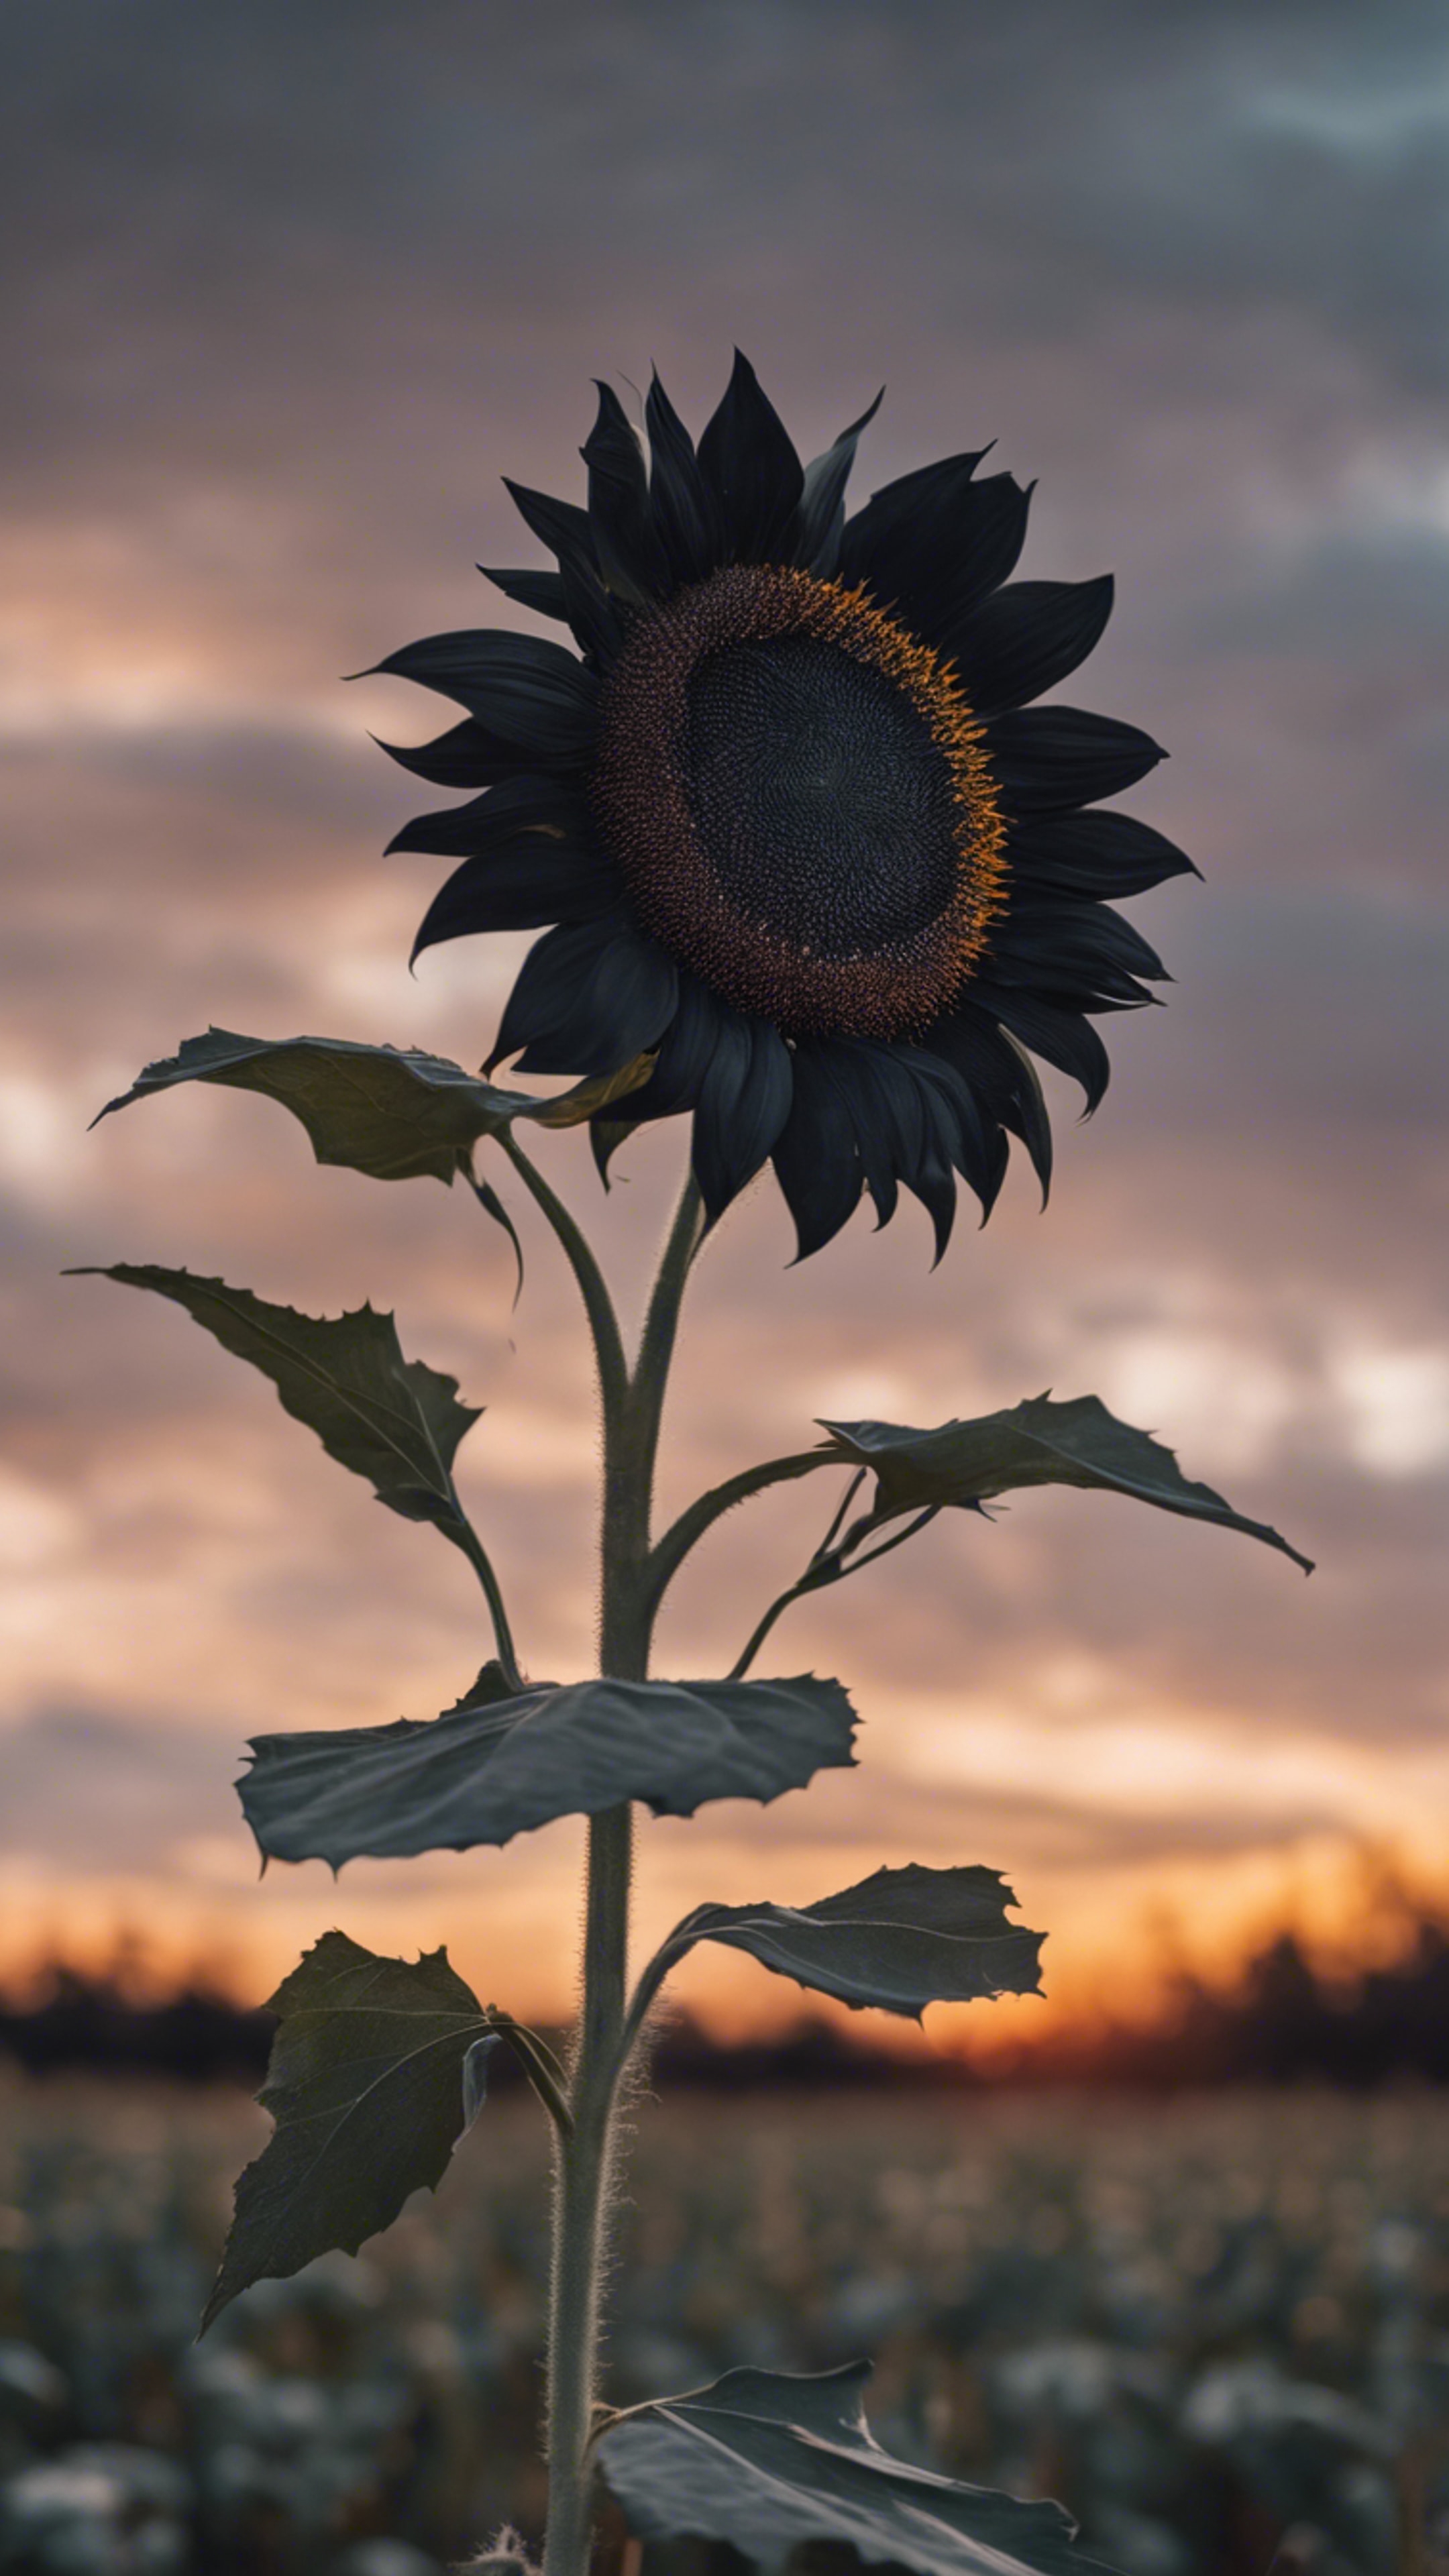 A whimsical black sunflower swaying gently in a breezy fall field under a twilight sky.壁紙[07aa79599ea14a61bf4d]